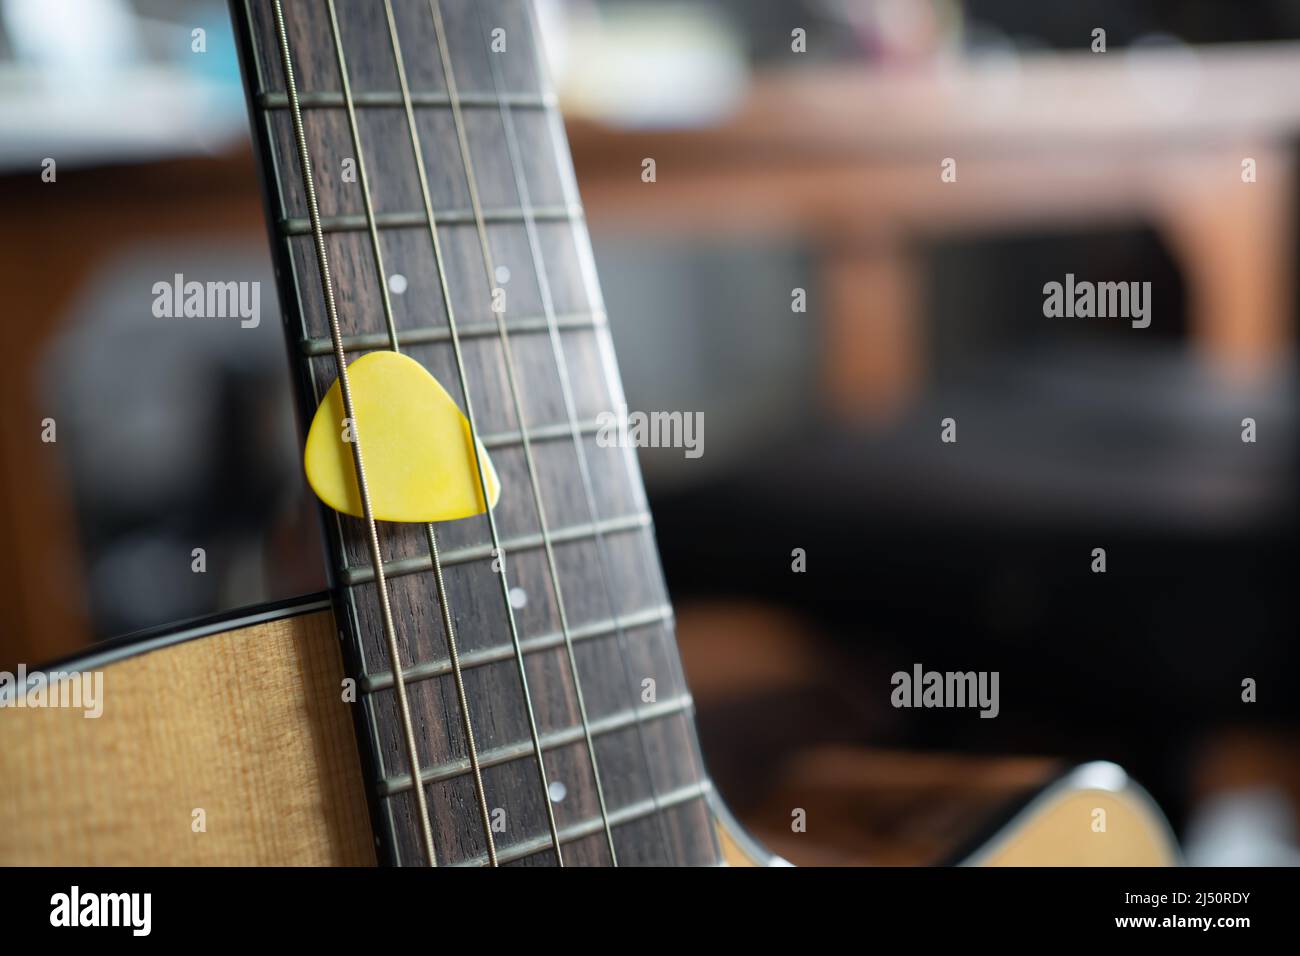 Yellow guitar pick on an acoustic guitar Stock Photo